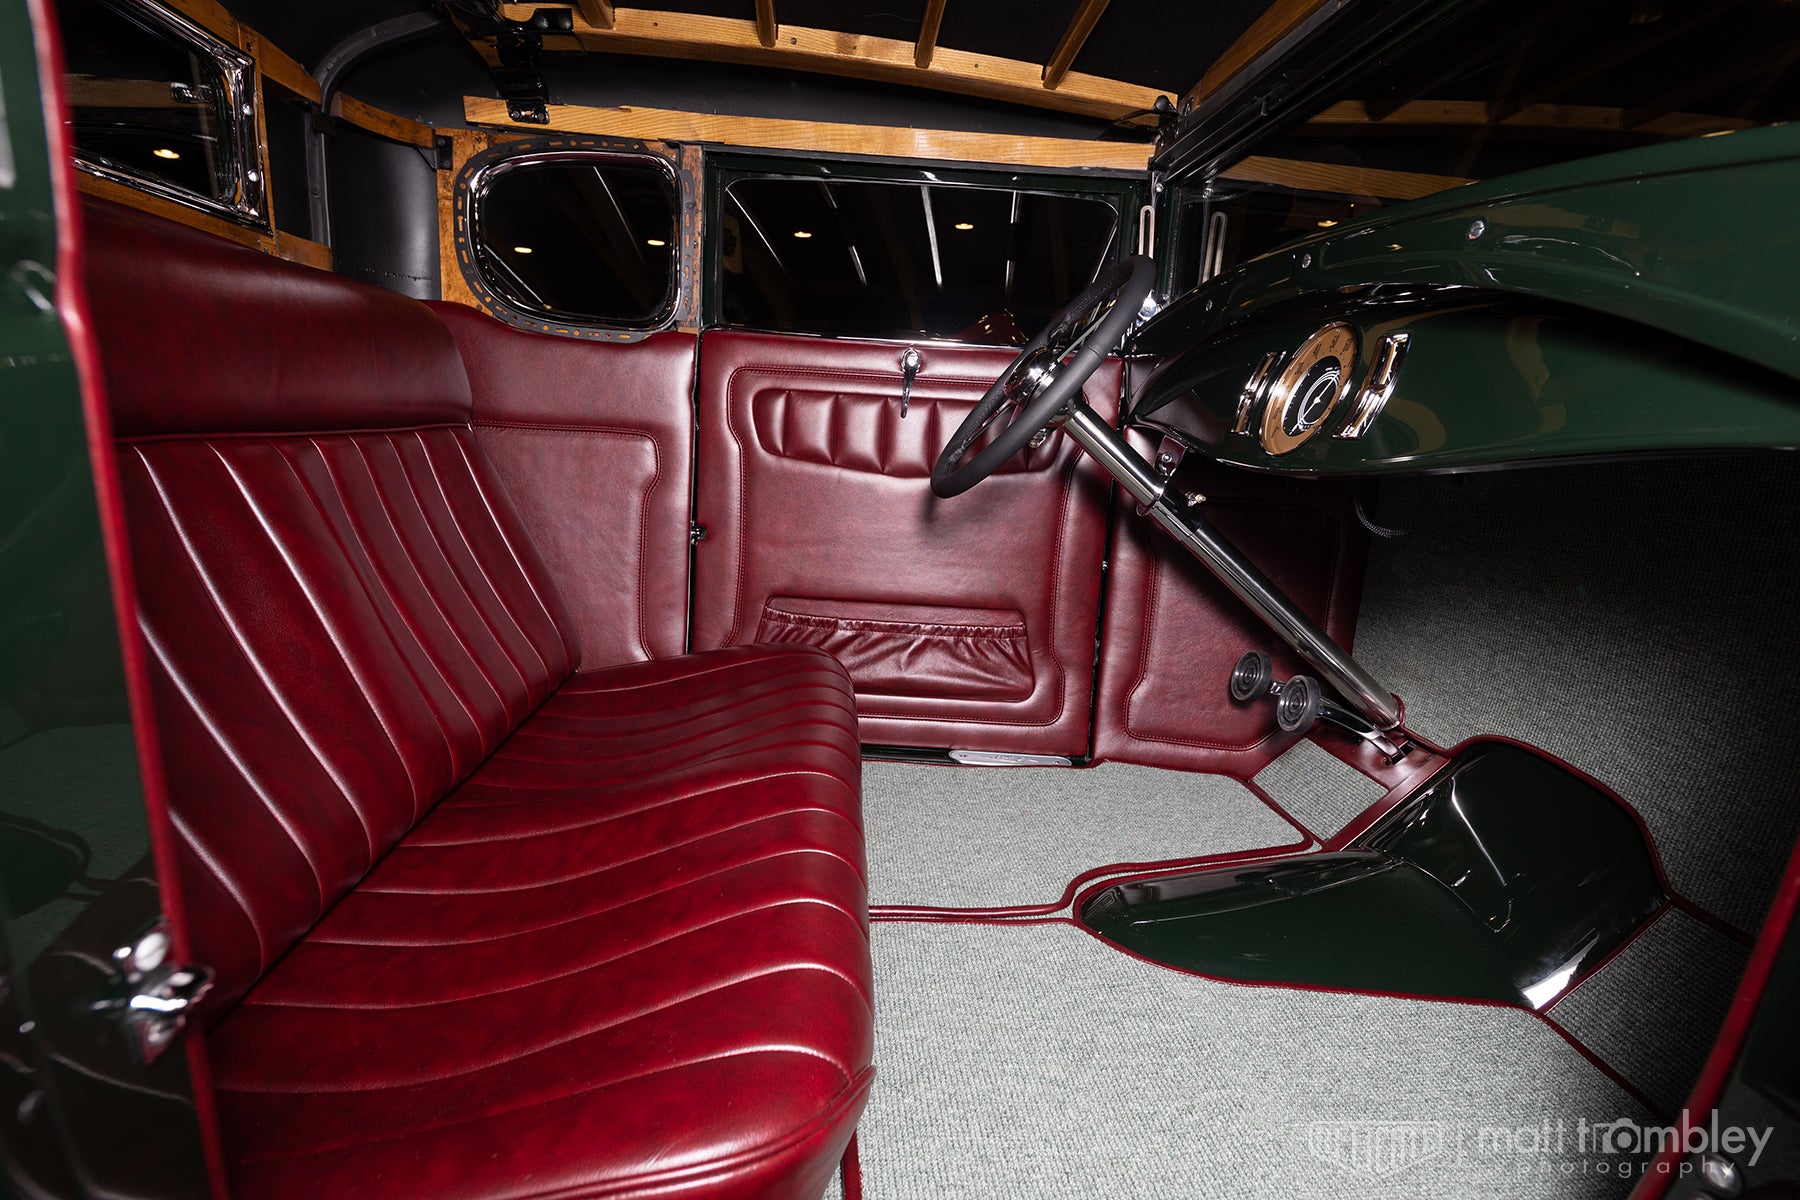 Hilton Hot Rods 1931 Ford Coupe with Relicate Leather Oxblood interior